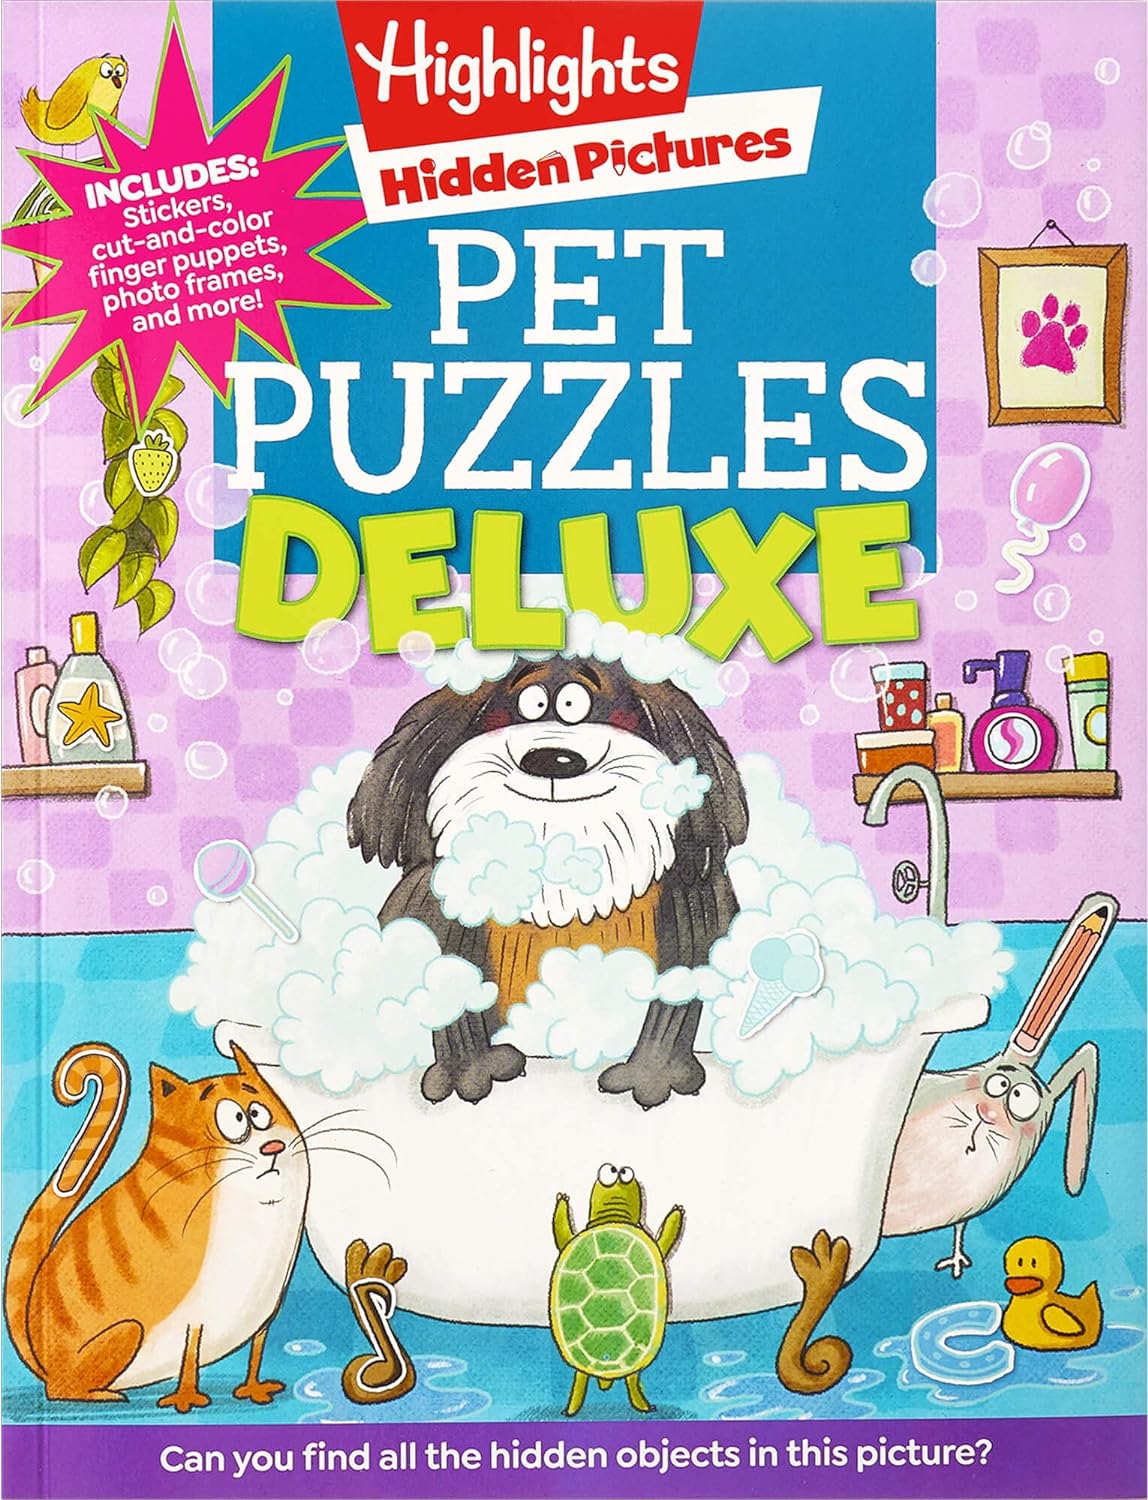 Highlights Pet Puzzles Deluxe Hidden Pictures Book